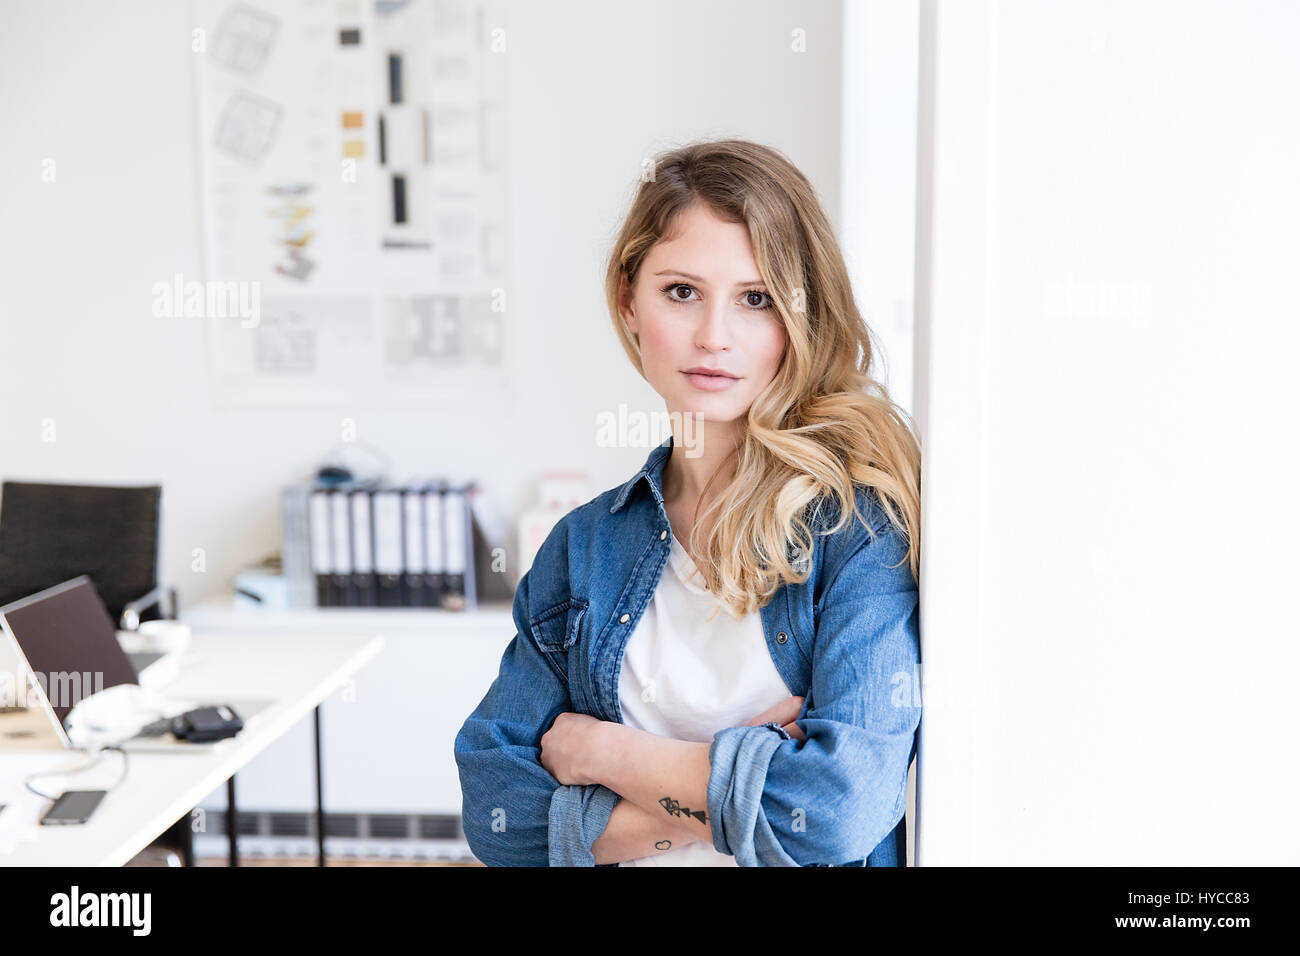 Young woman in office leaning against wall arms crossed looking at camera Stock Photo